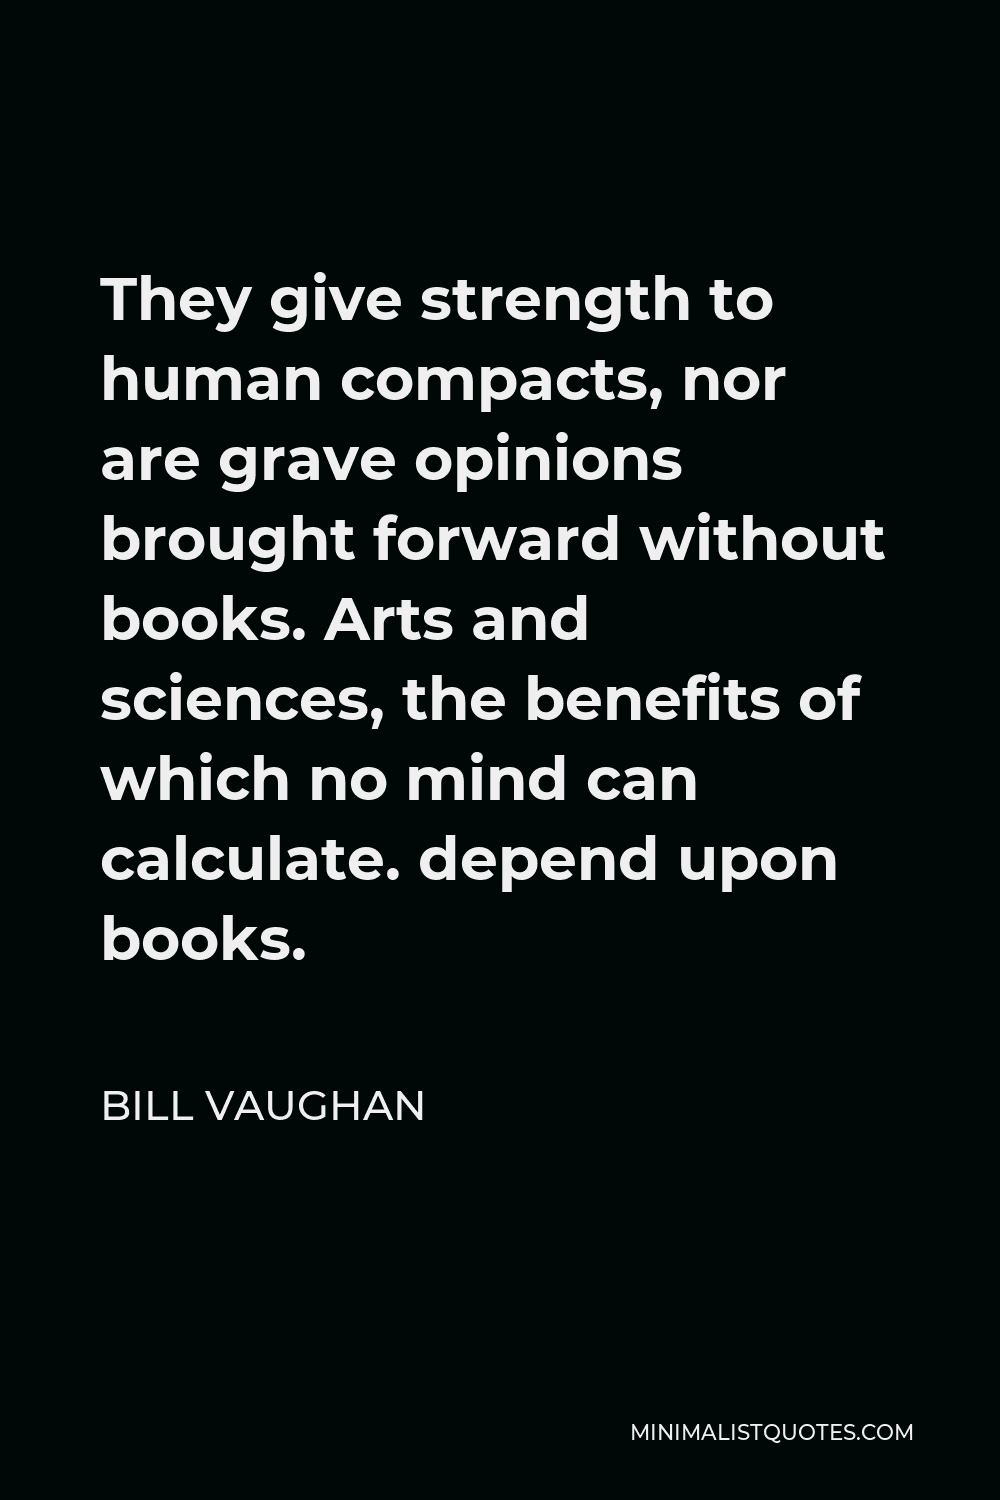 Bill Vaughan Quote - They give strength to human compacts, nor are grave opinions brought forward without books. Arts and sciences, the benefits of which no mind can calculate. depend upon books.